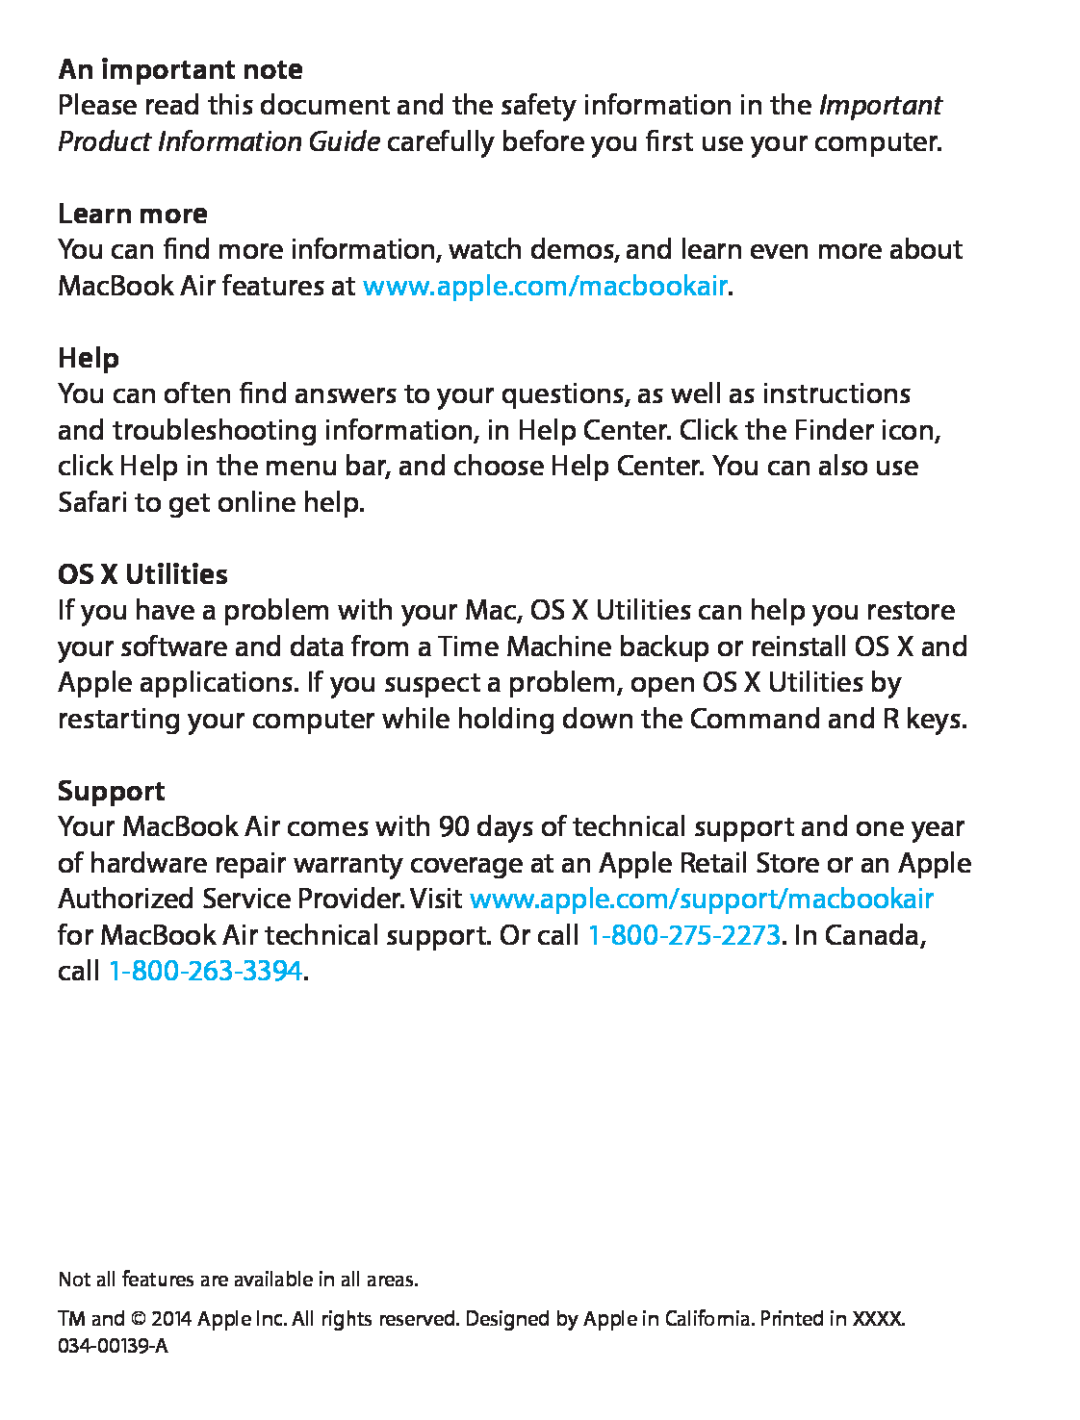 Apple MD711LL/A quick start An important note, Learn more, Help, OS X Utilities, Support 